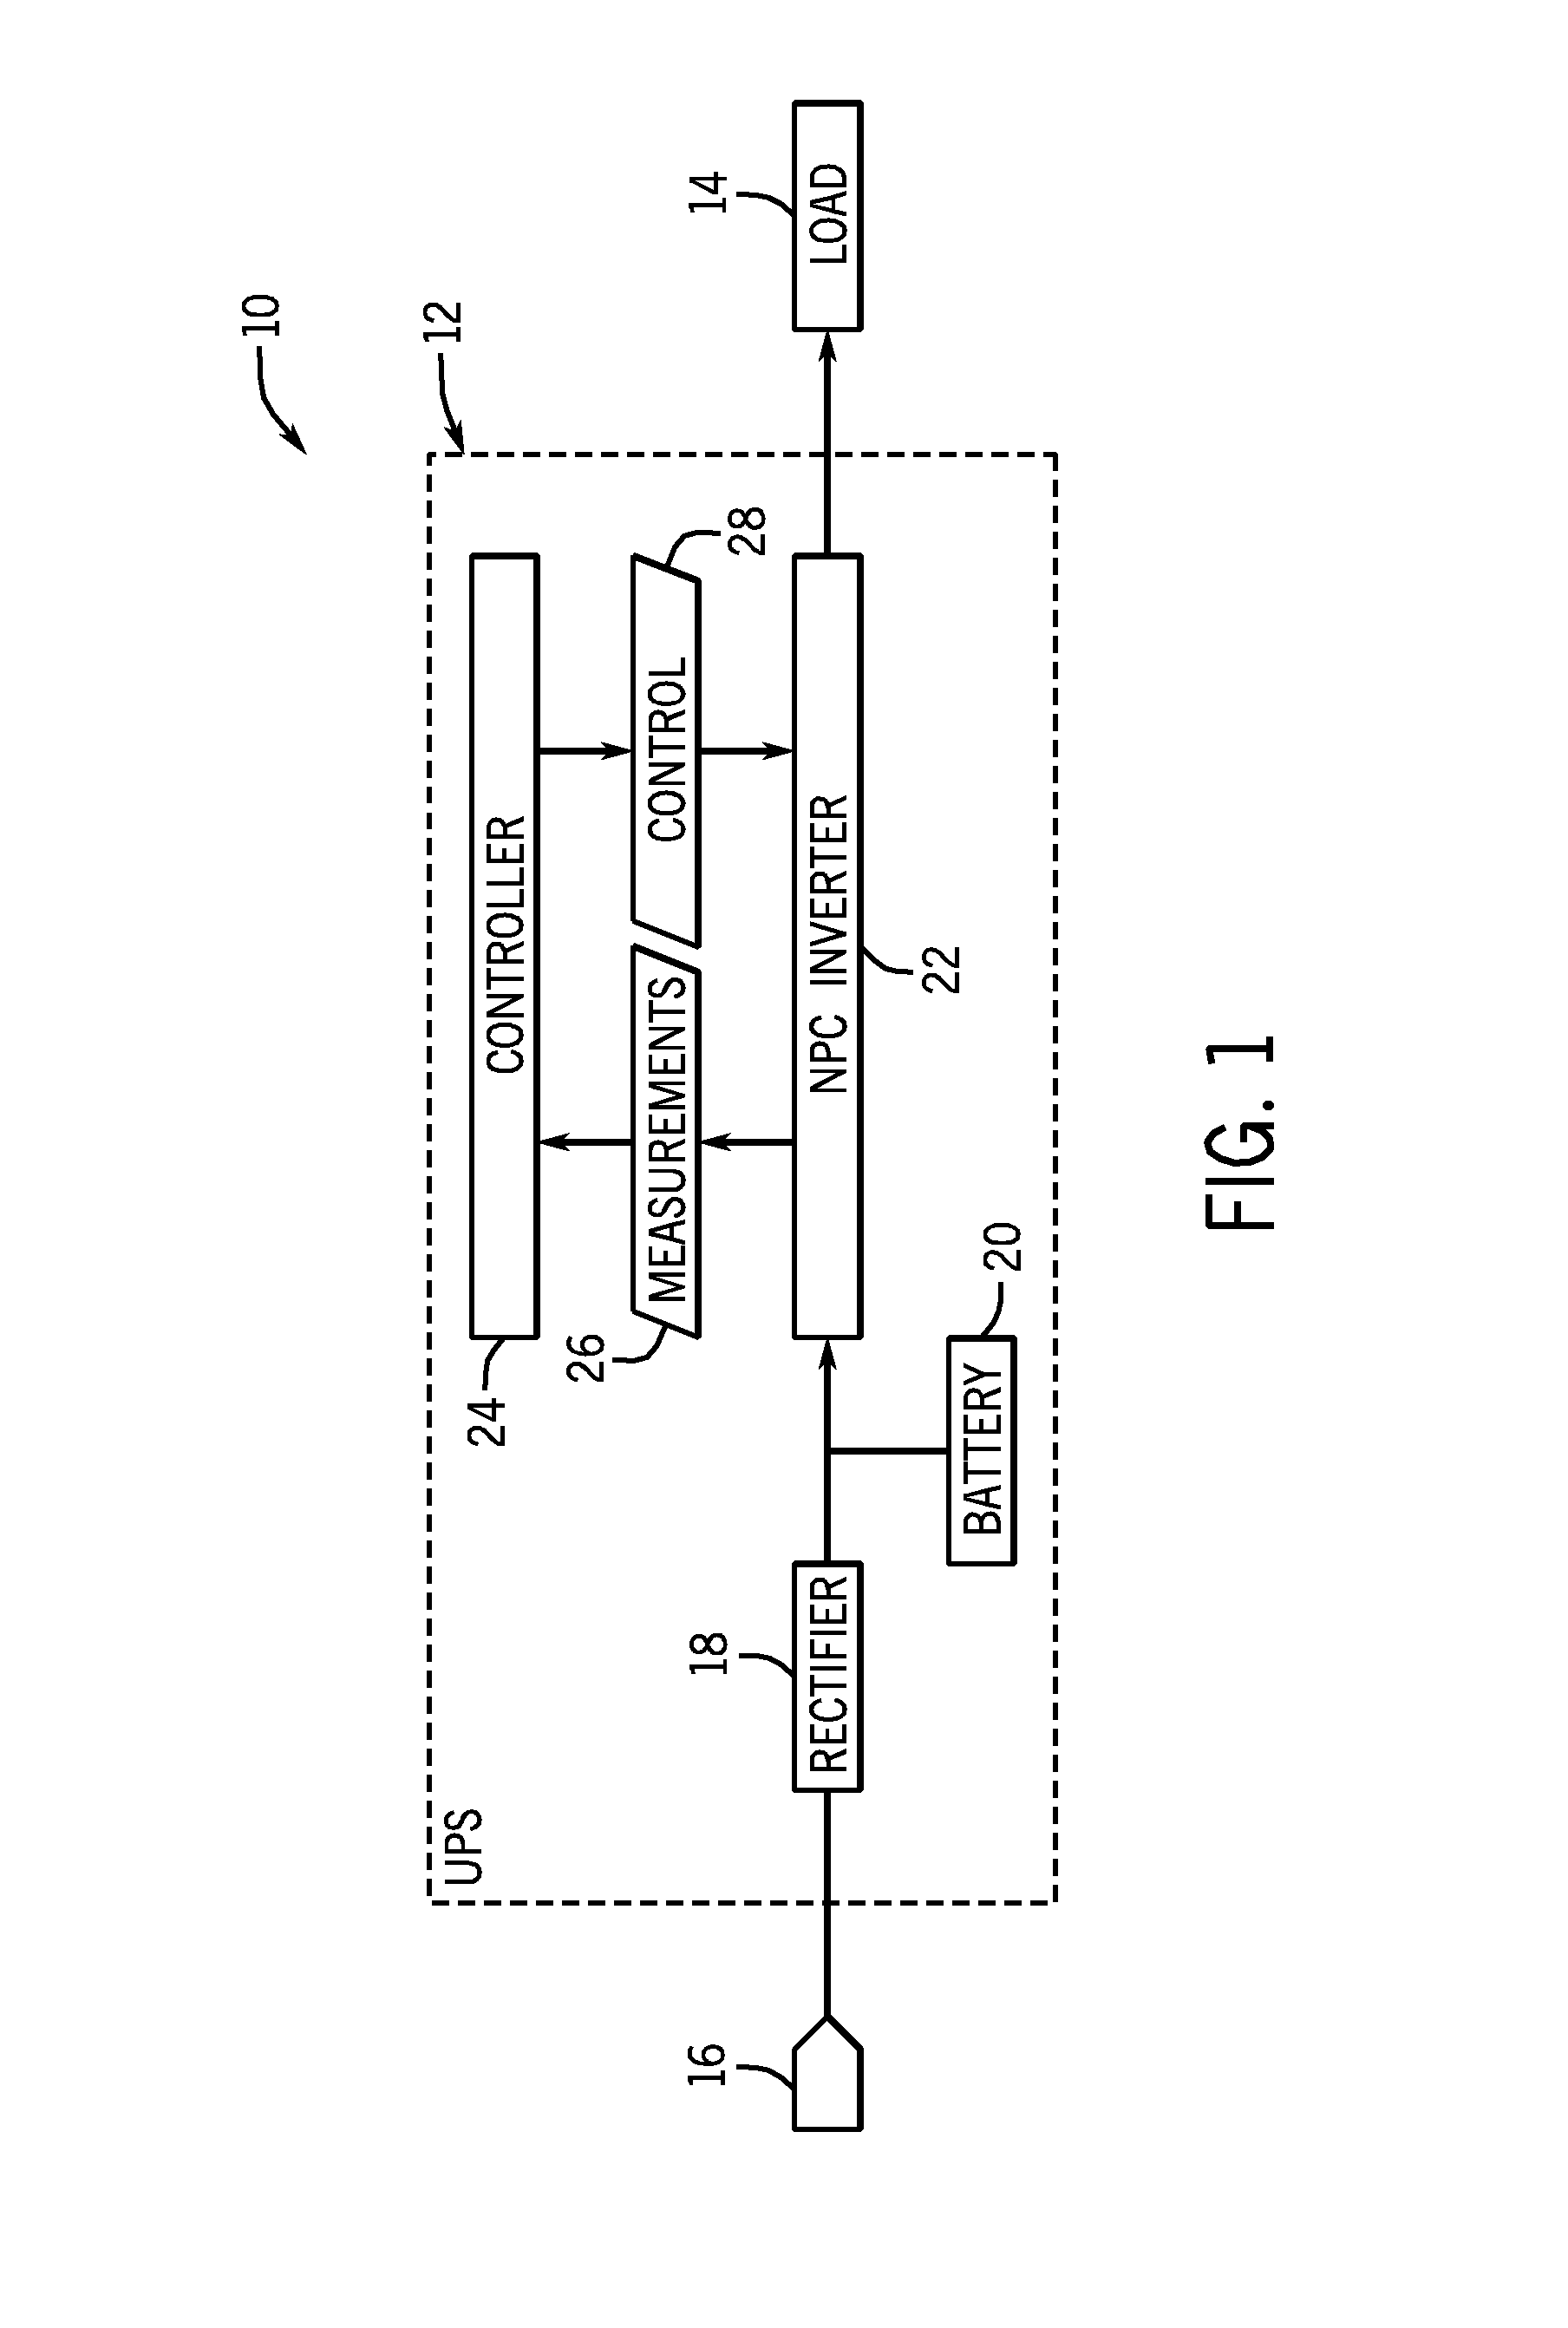 Intelligent Level Transition Systems and Methods for Transformerless Uninterruptible Power Supply